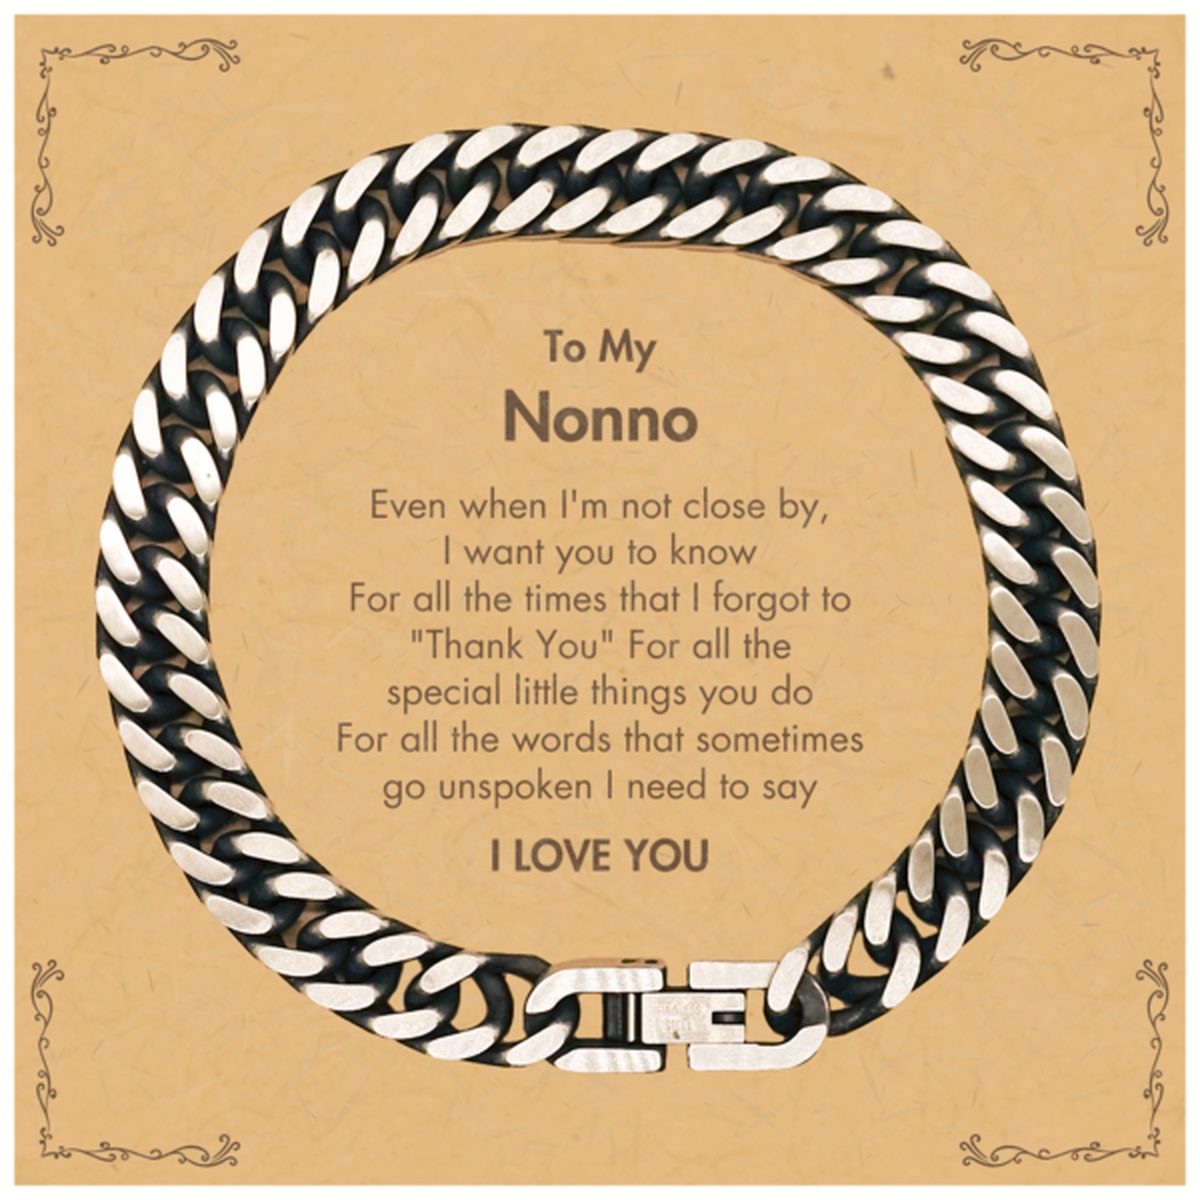 Thank You Gifts for Nonno, Keepsake Cuban Link Chain Bracelet Gifts for Nonno Birthday Mother's day Father's Day Nonno For all the words That sometimes go unspoken I need to say I LOVE YOU